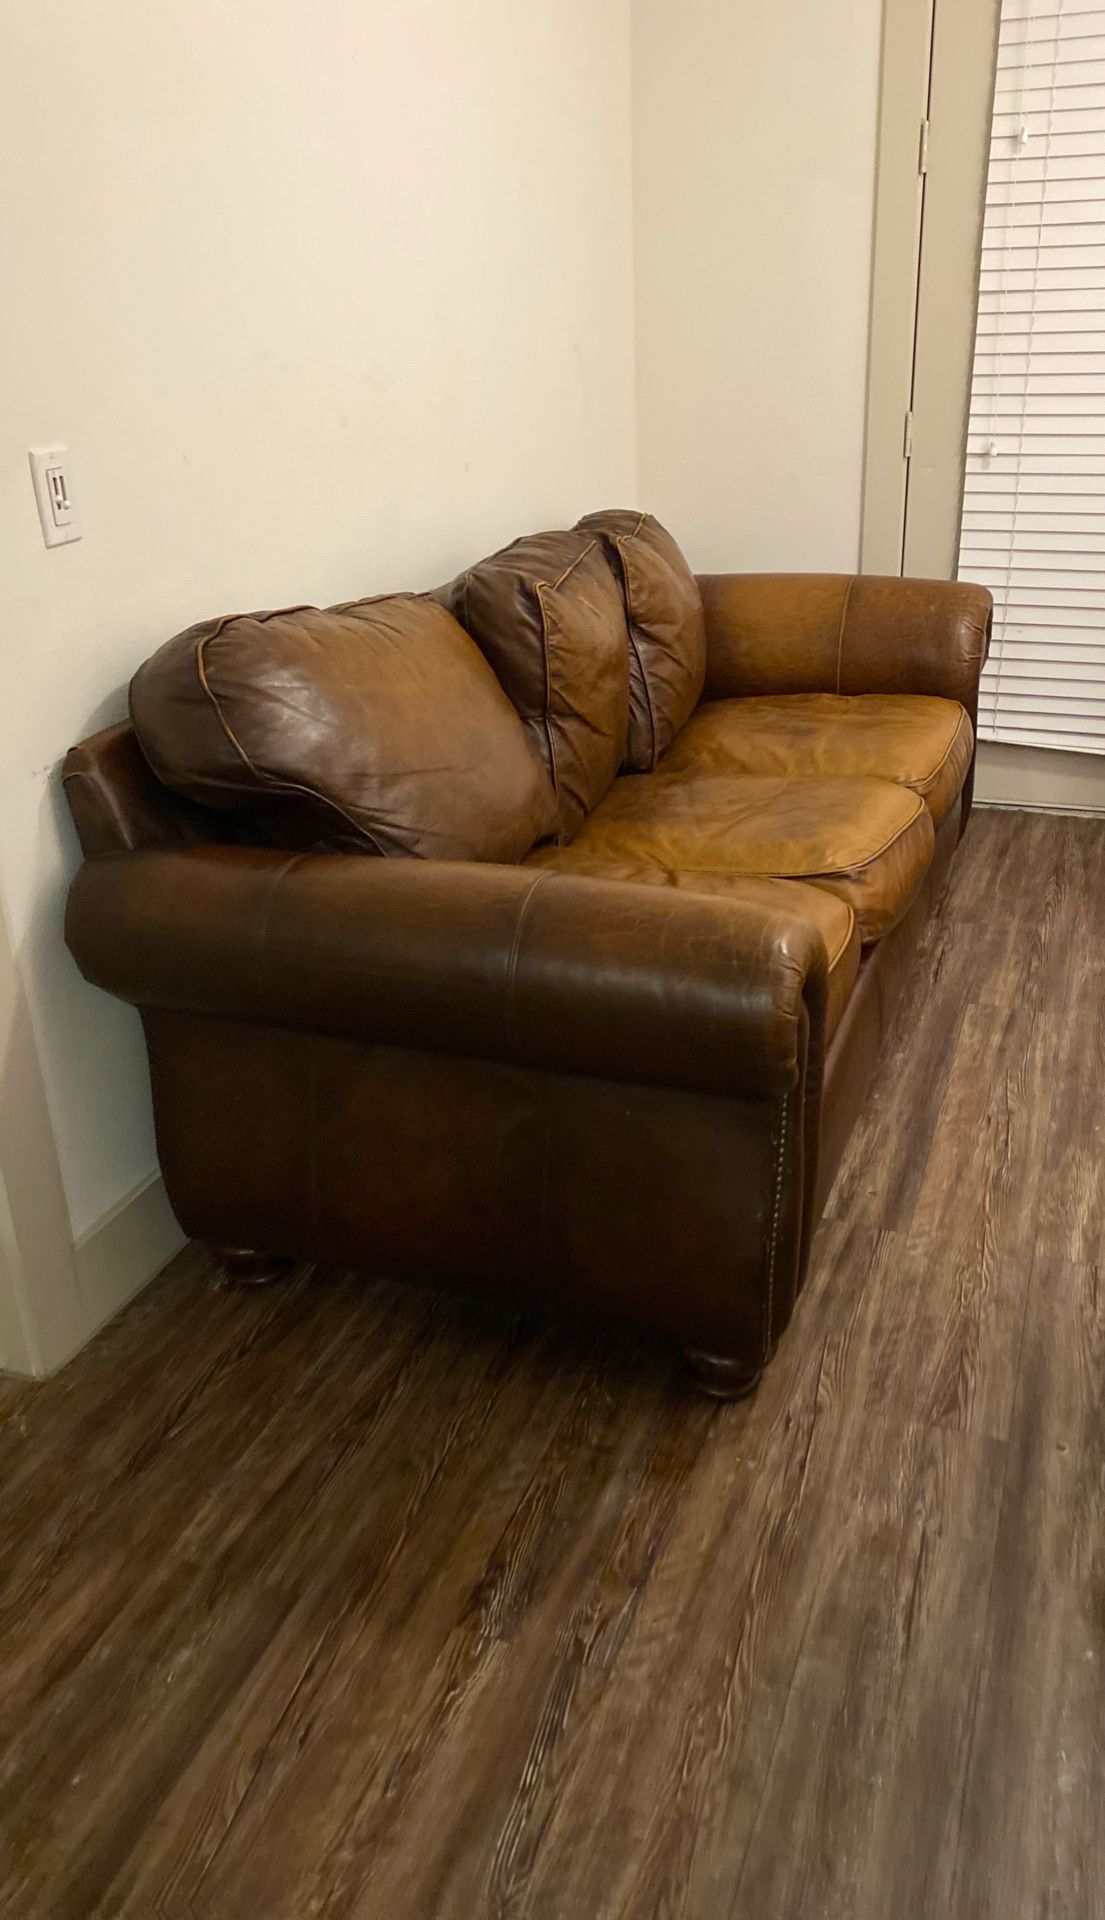 Leather sofa - needs to go today! Make an offer